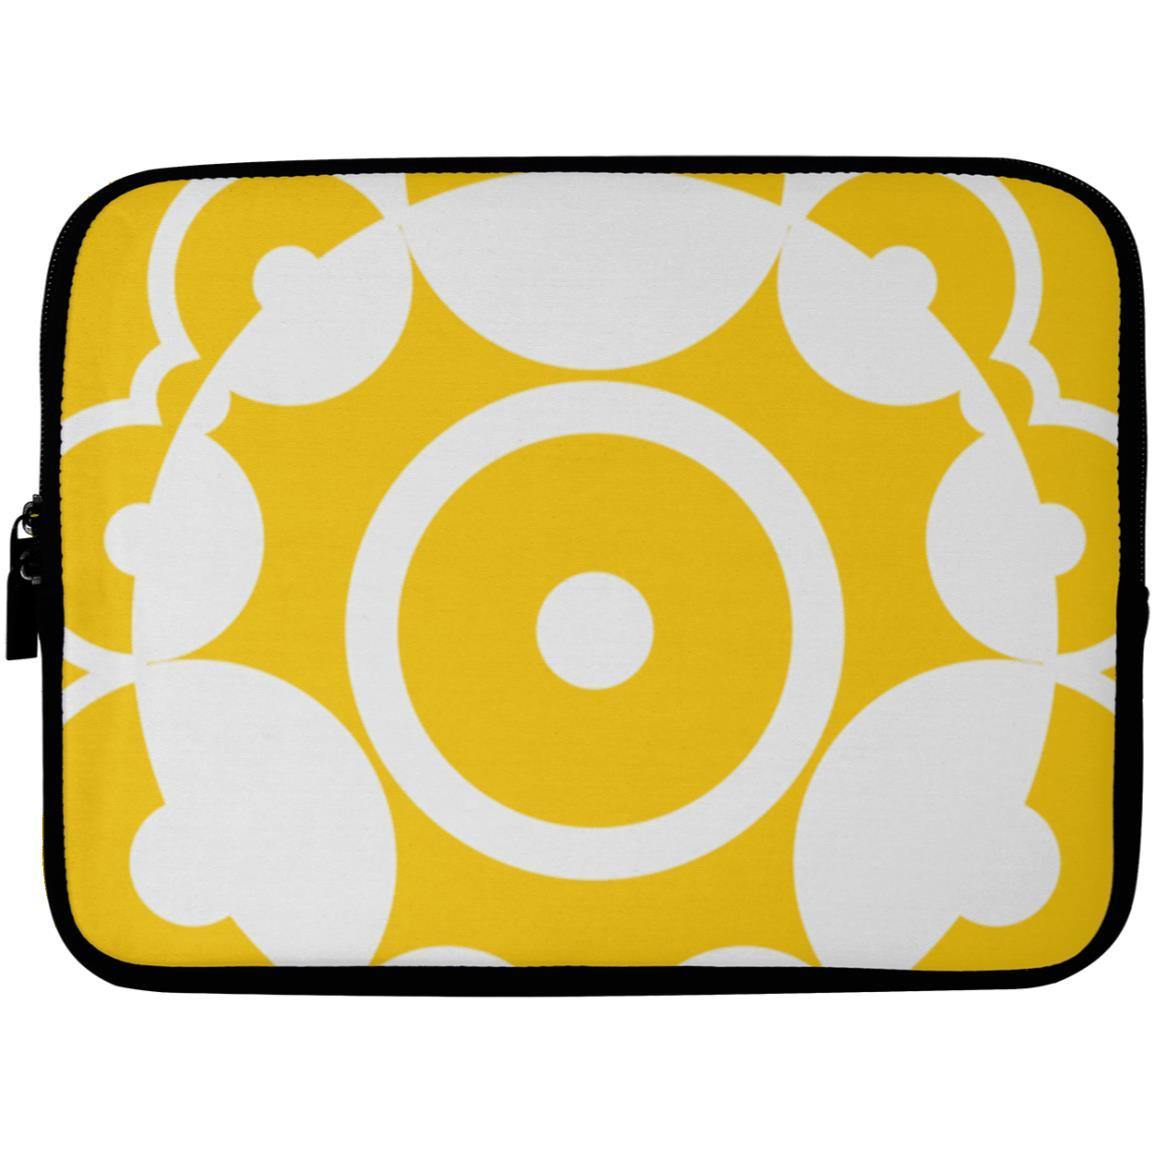 Crop Circle Laptop Sleeve - Clanfield - Shapes of Wisdom